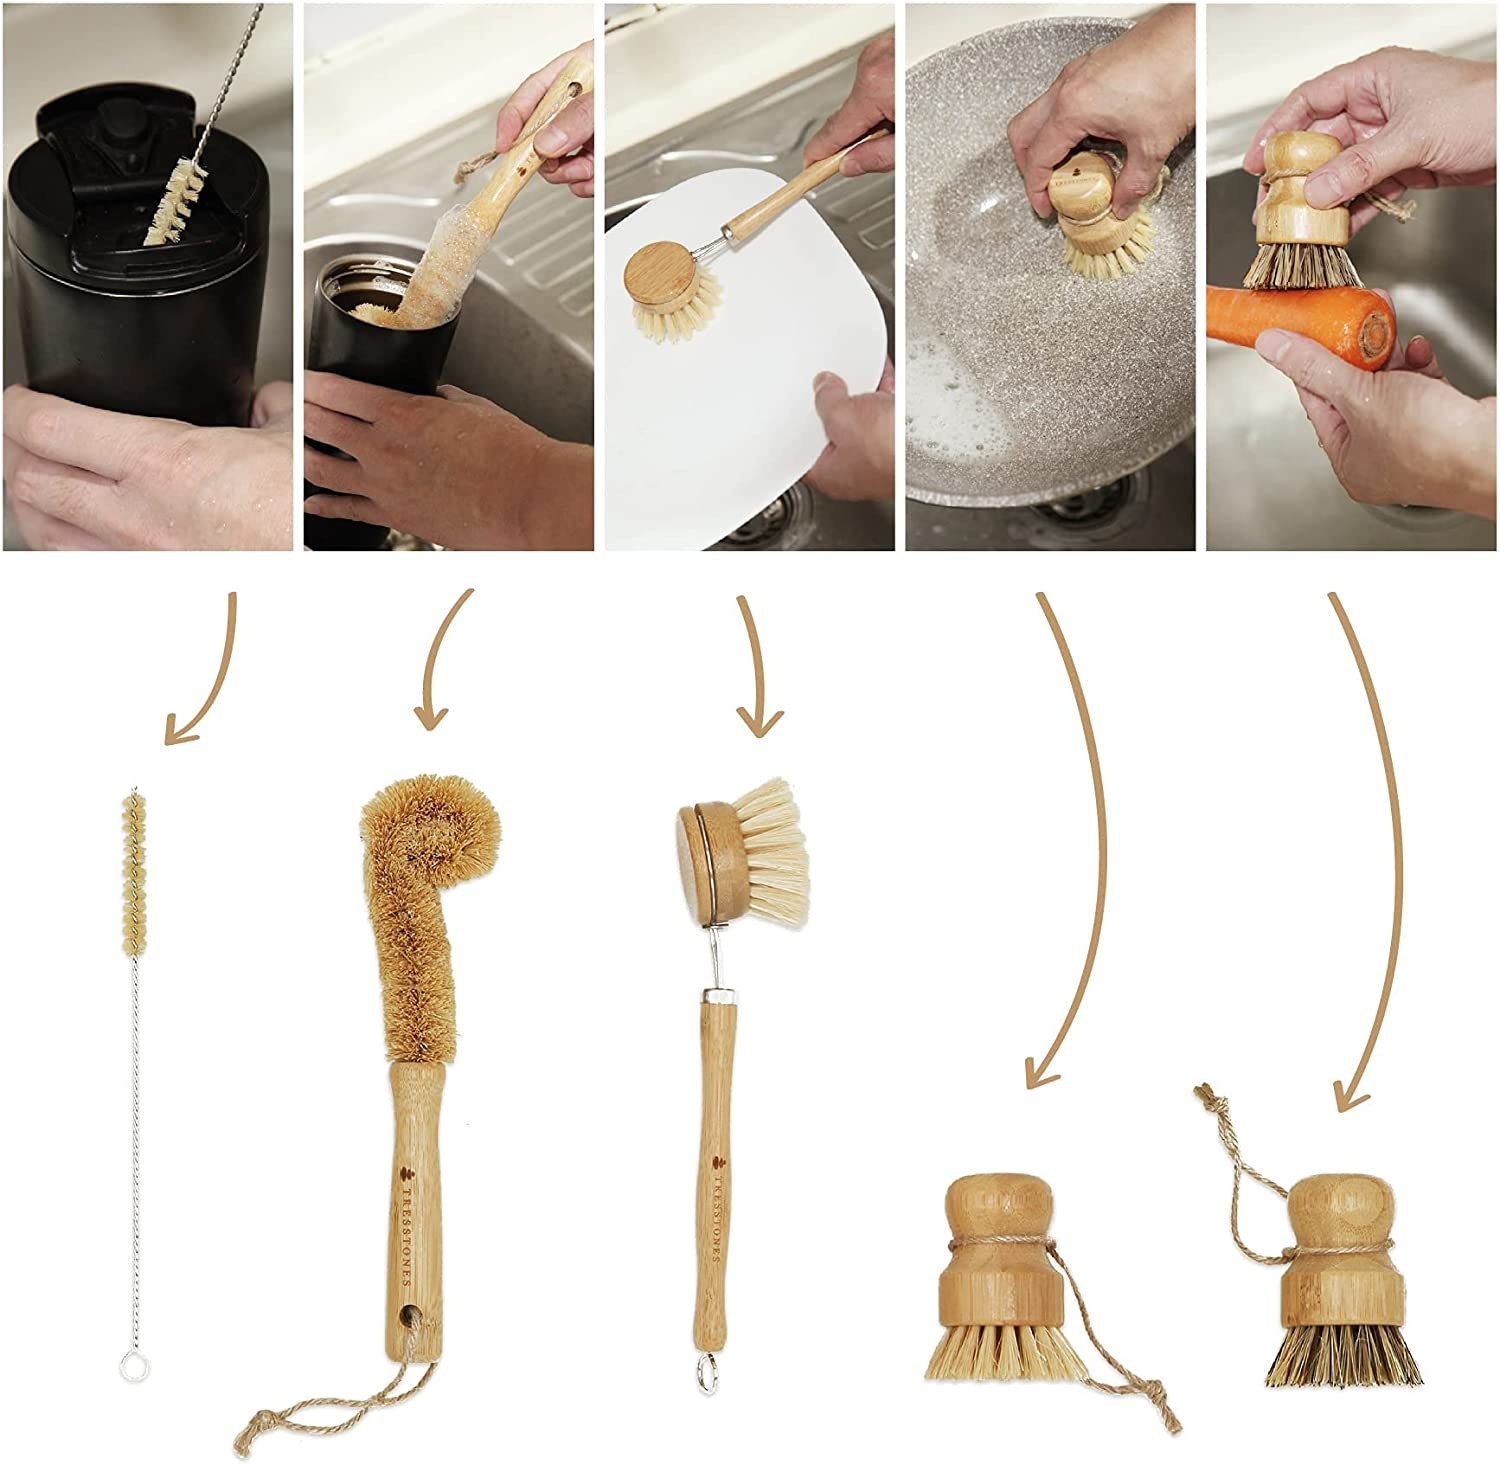 A example of each brush and what it can be used for according to the store